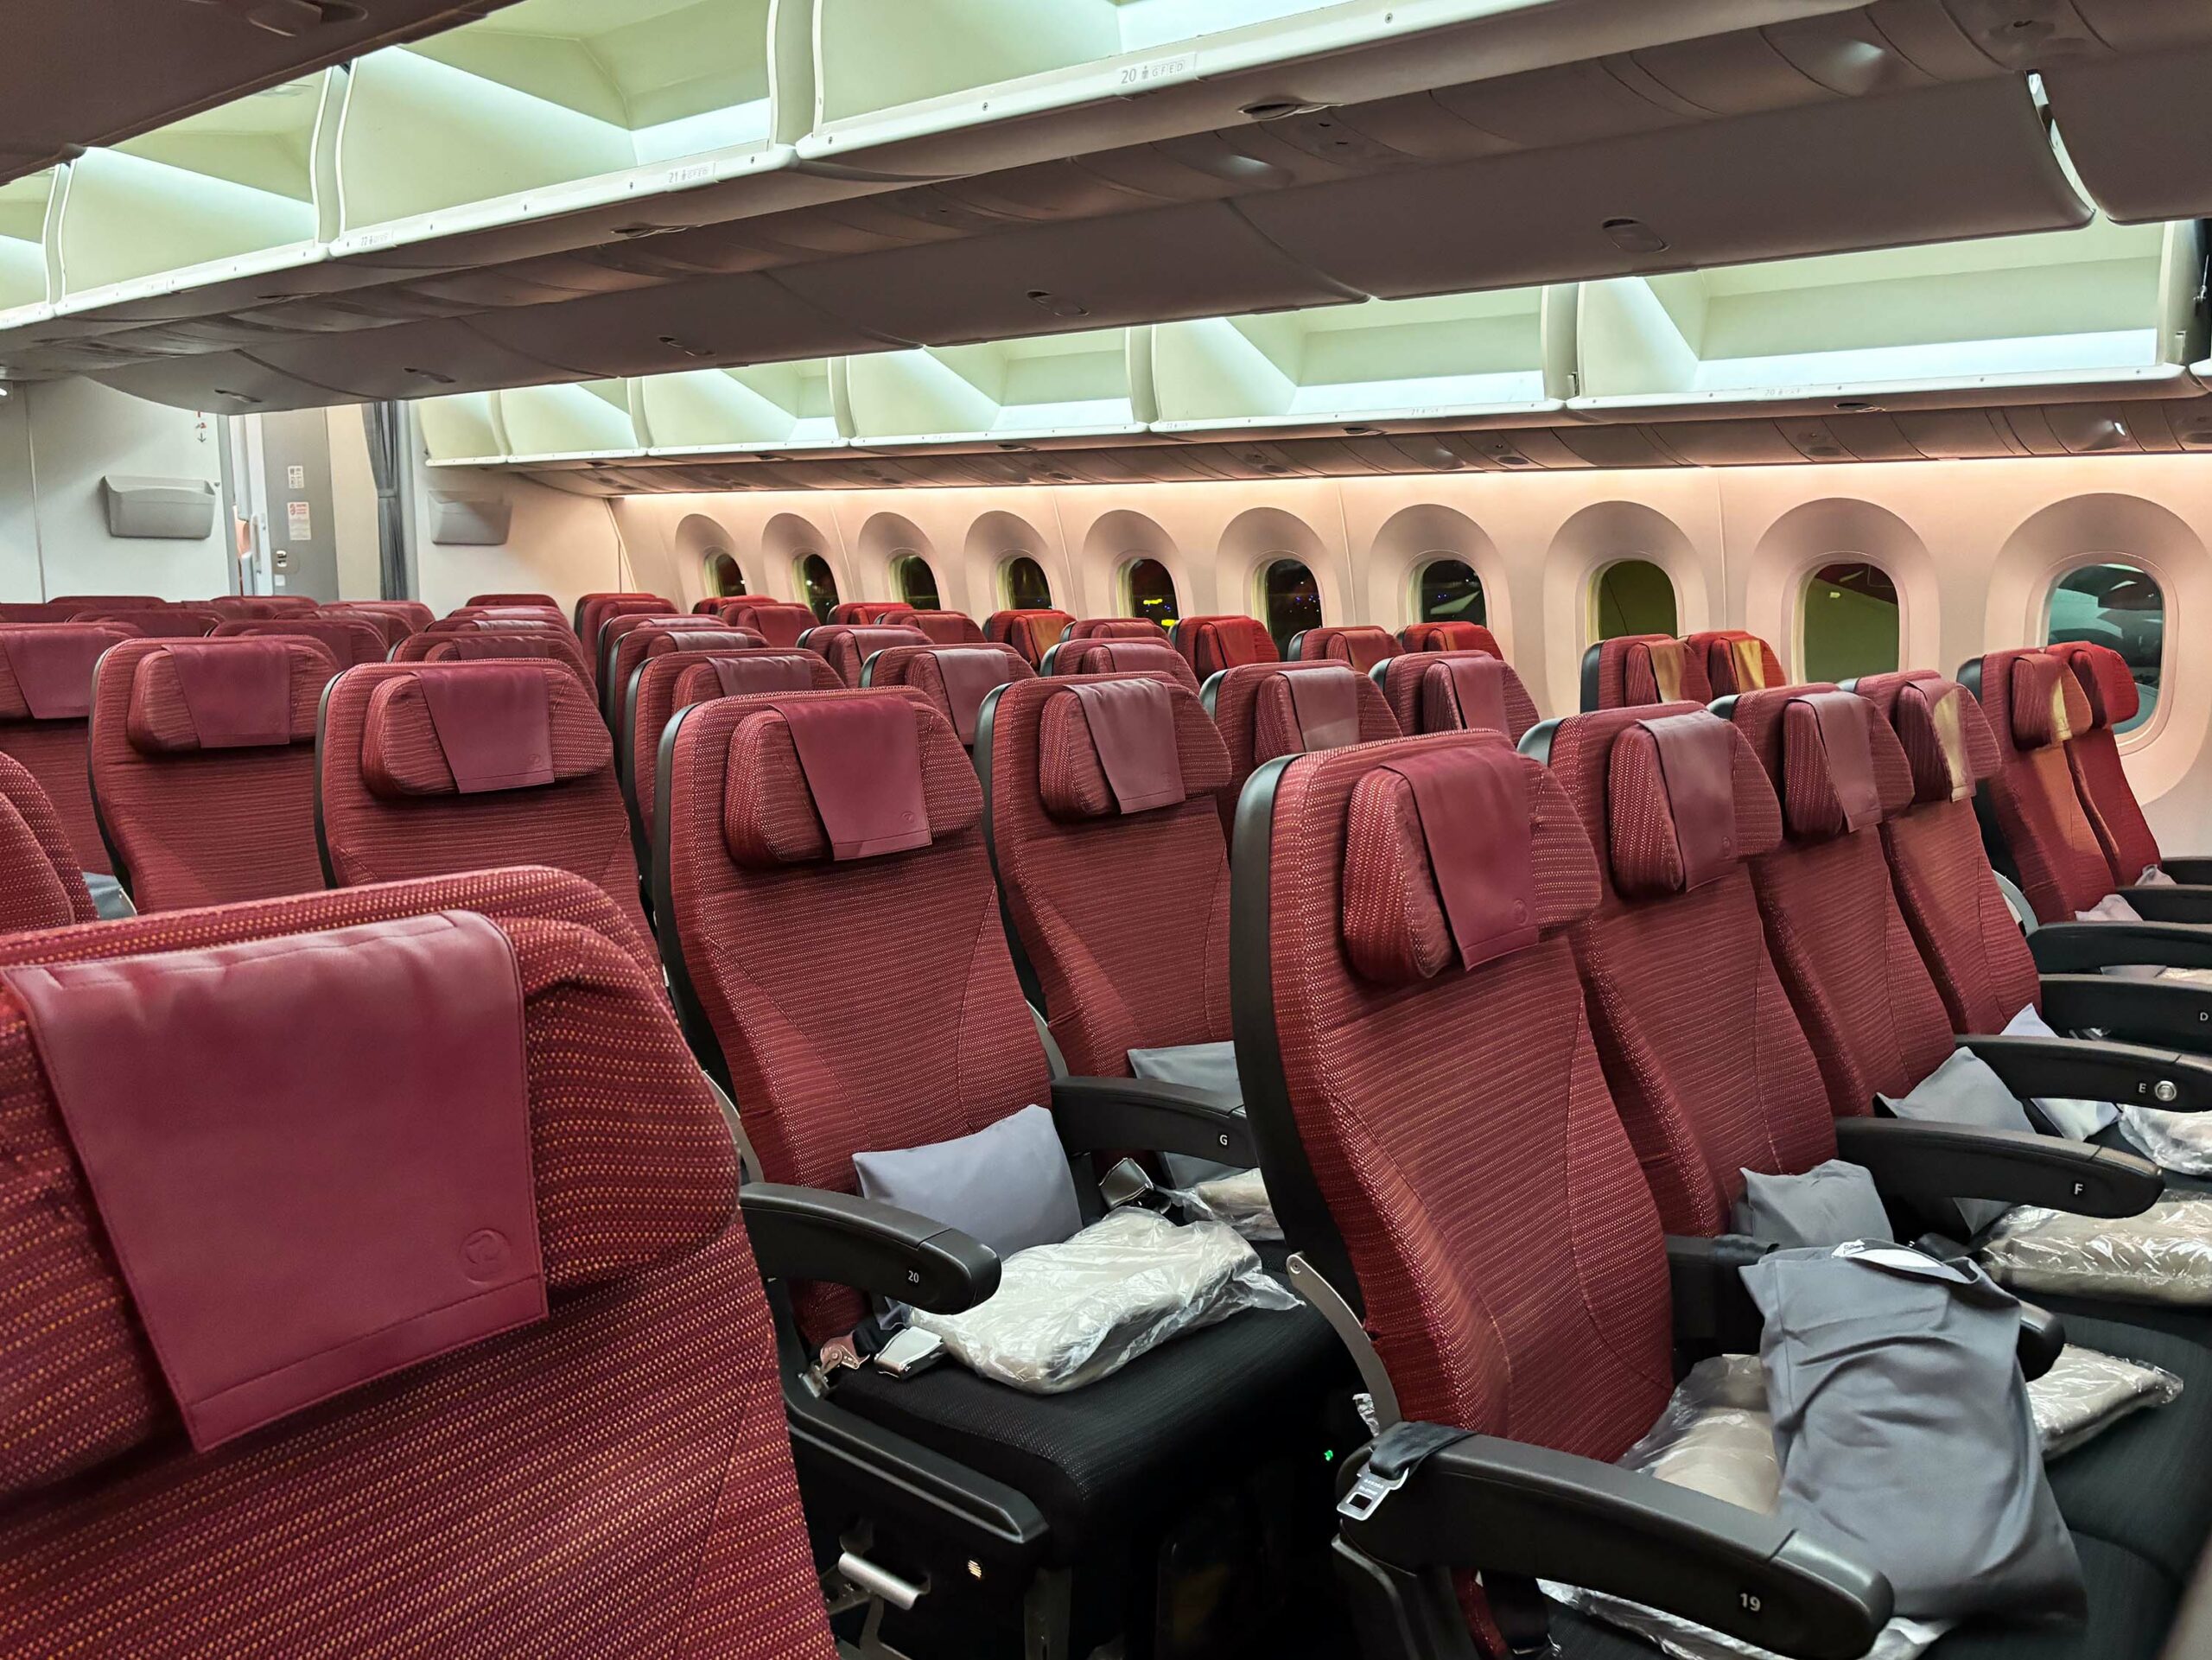 Review: Japan Airlines 787-8 Economy Class (NRT-CGK)